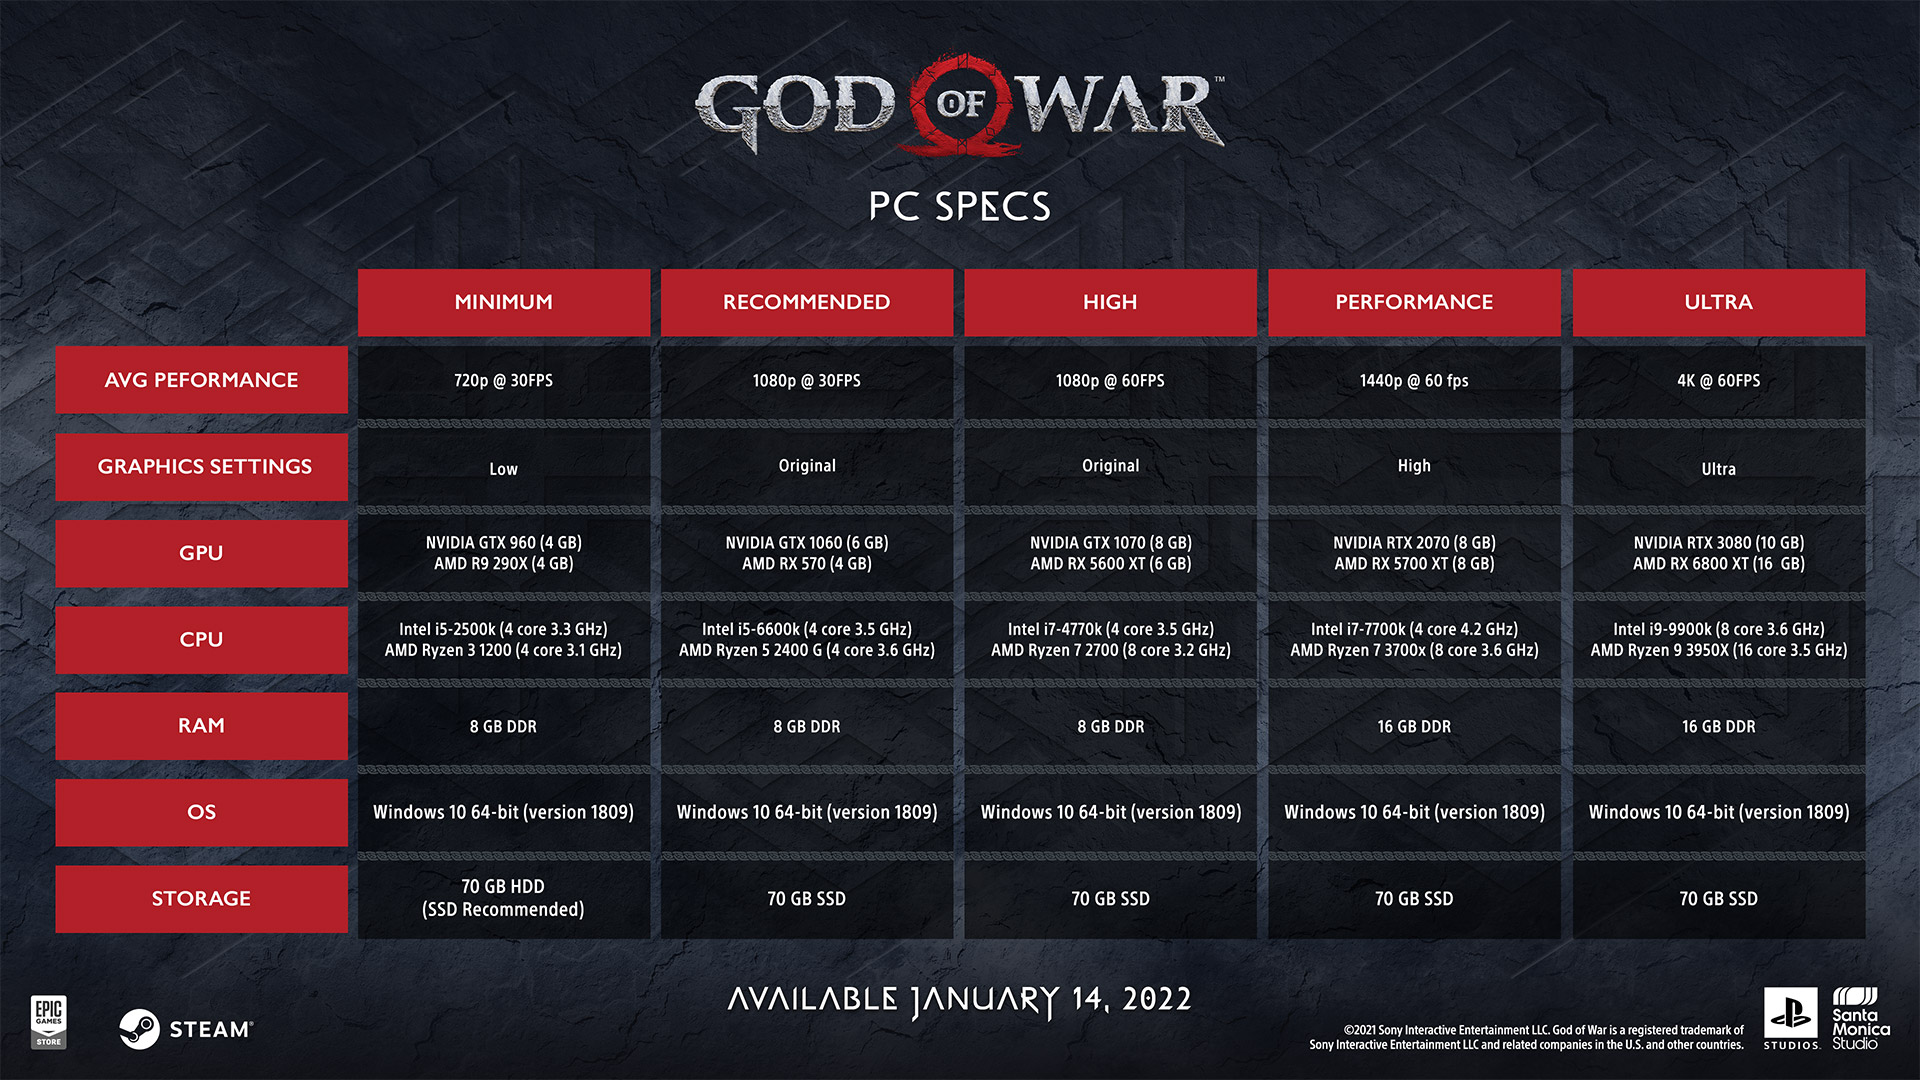 God of War PC Trailer Details Visual Improvements, System Requirements Confirmed